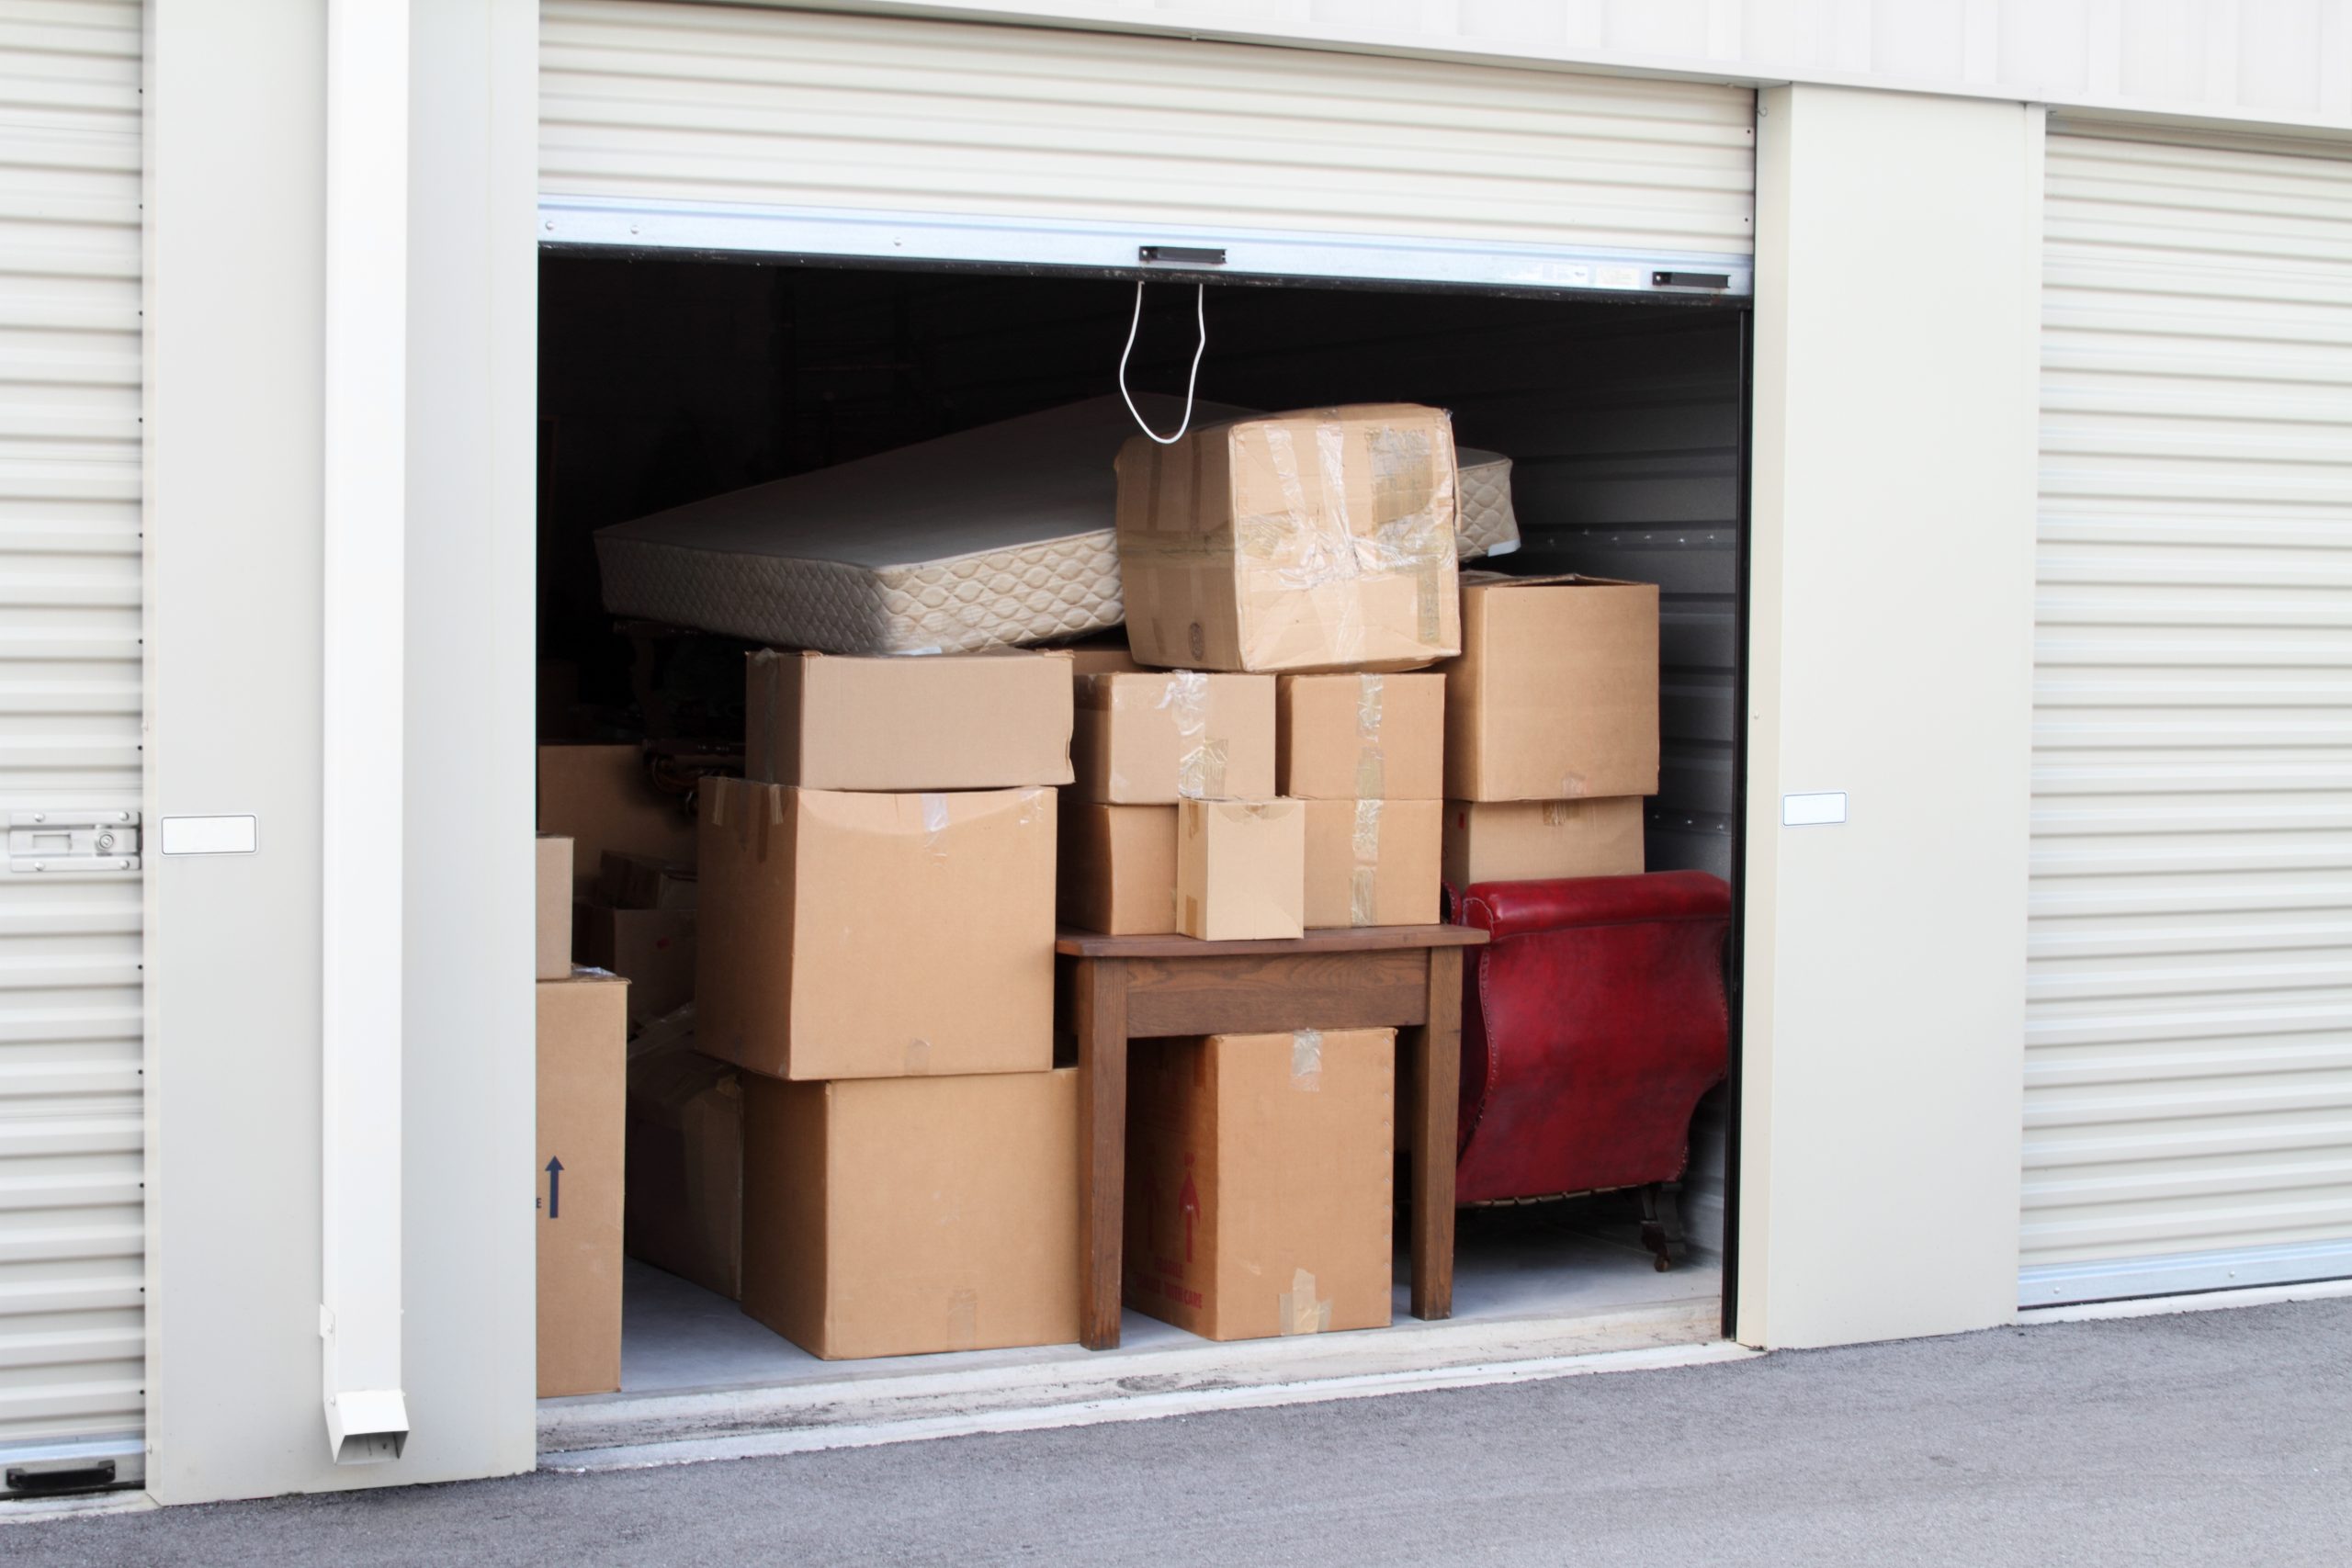 What Can You Expect From a Full-Service Moving Company?